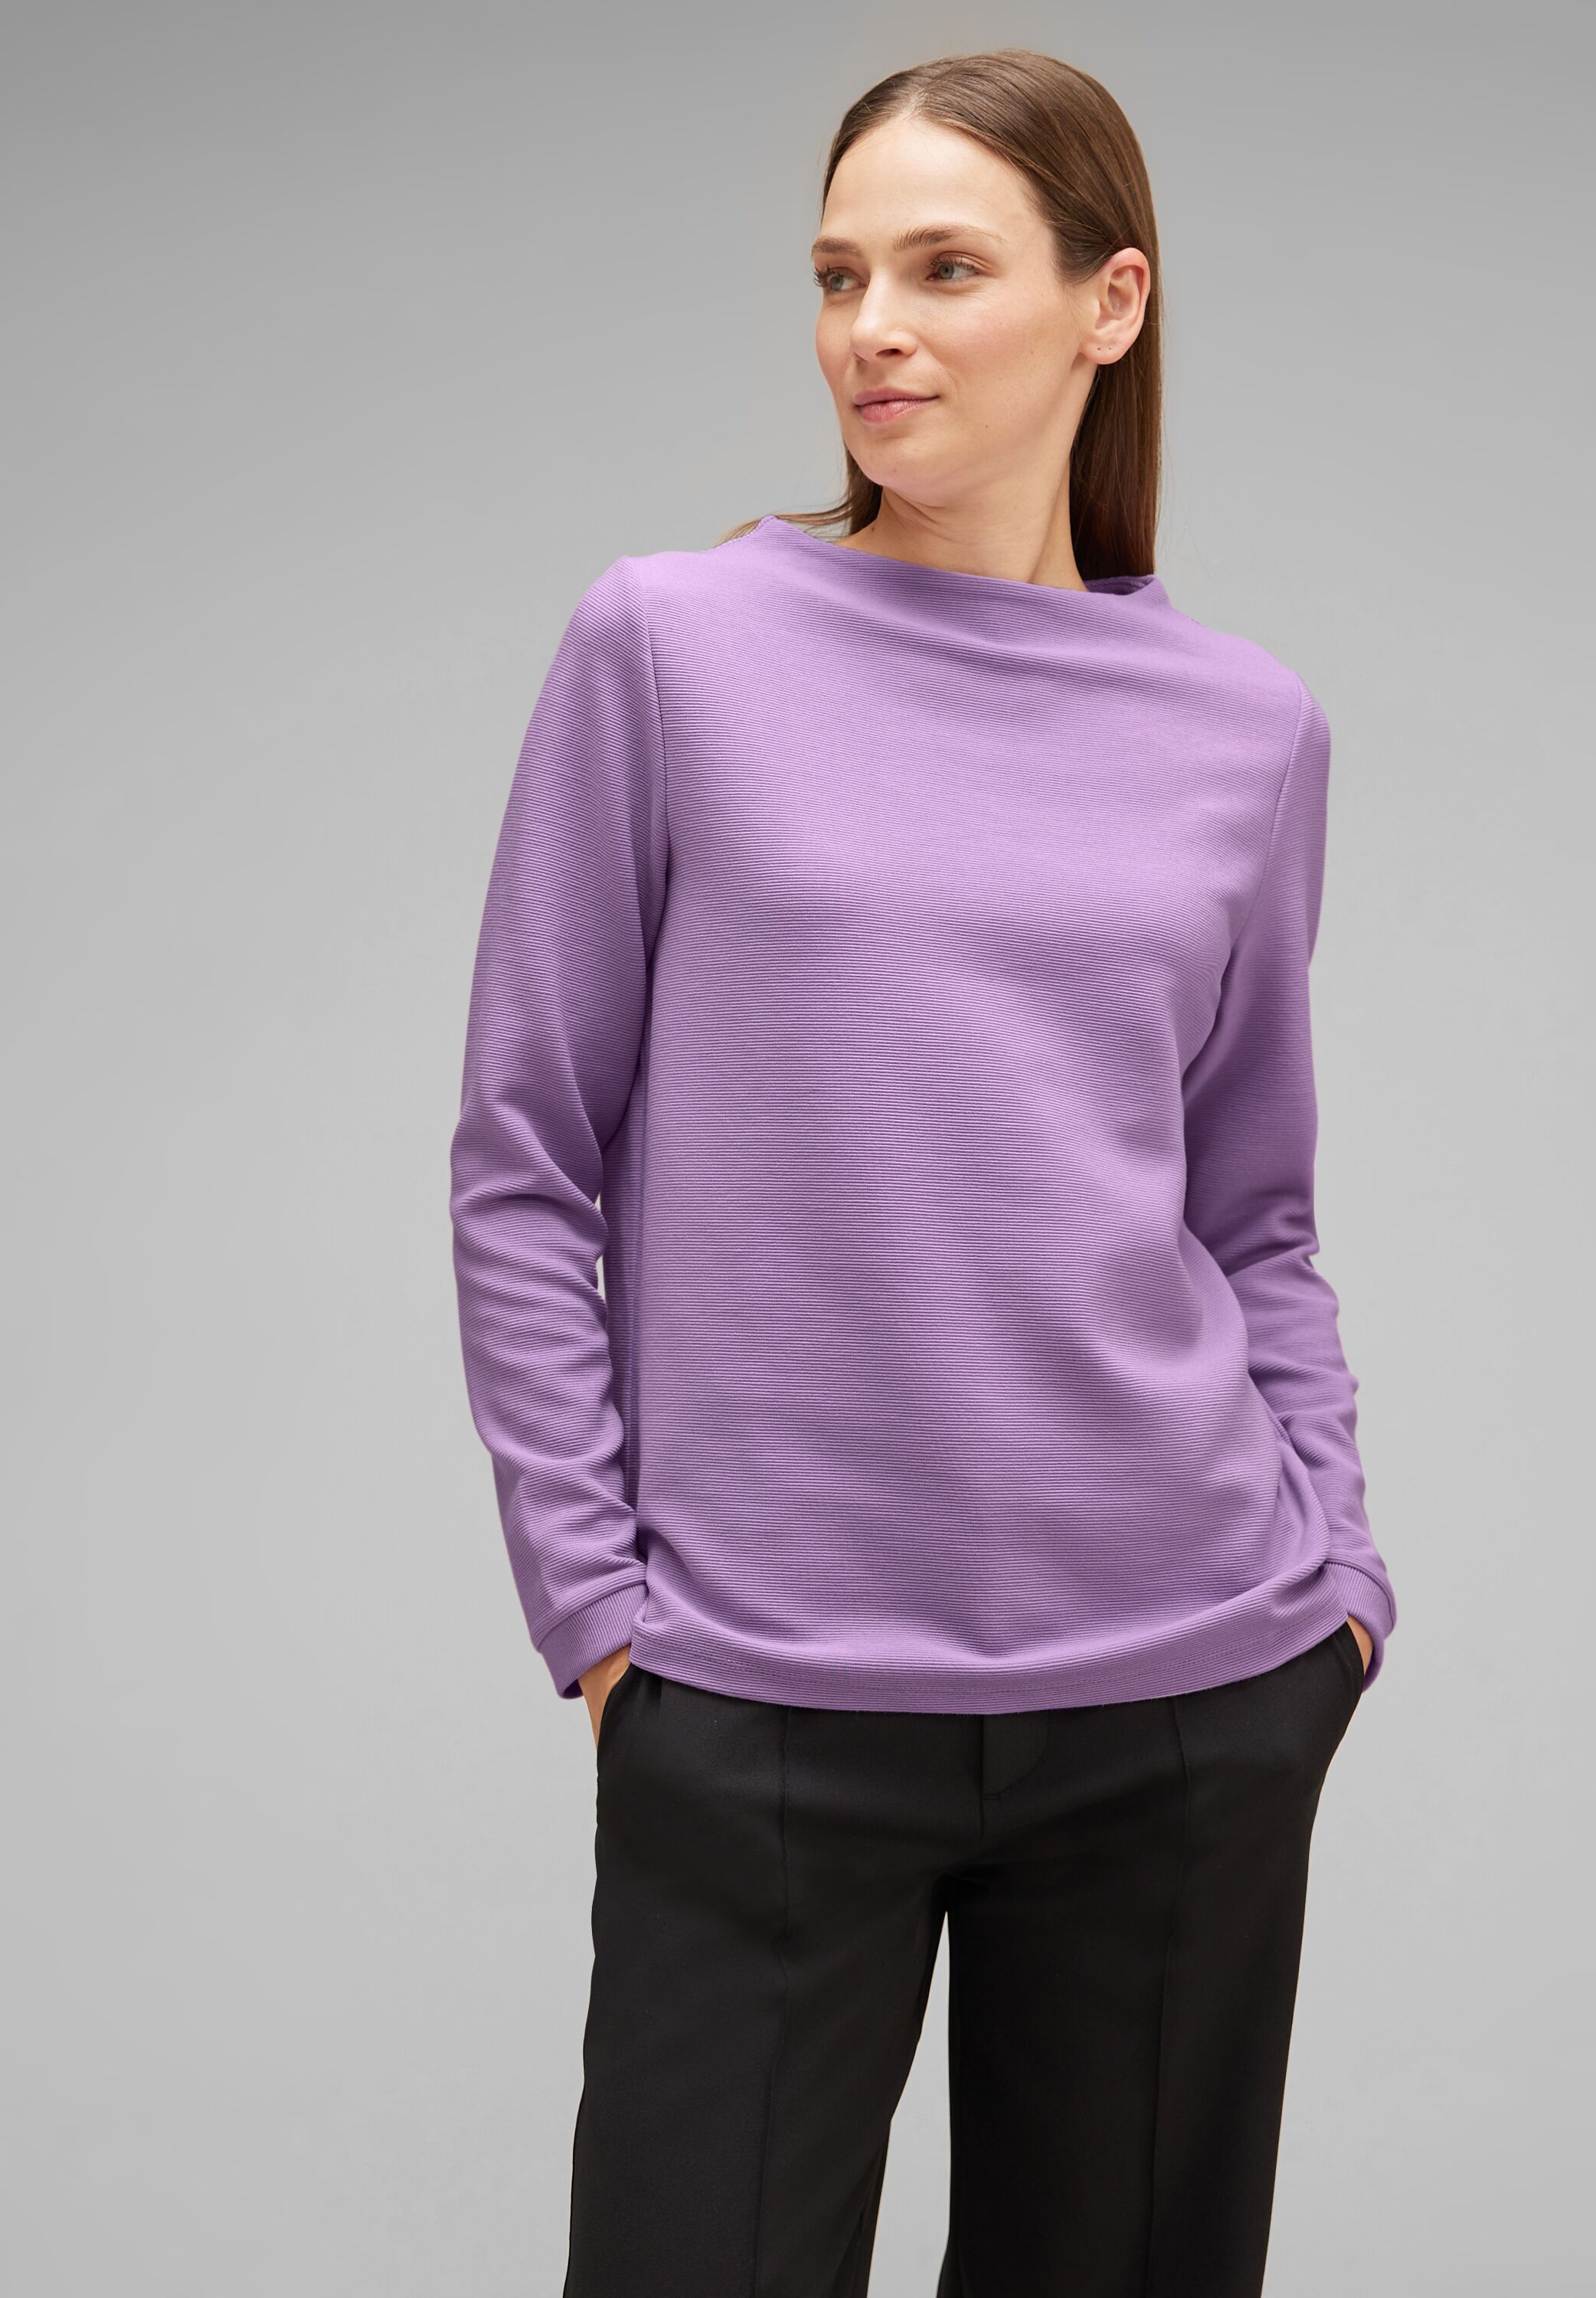 Street One Langarmshirt in Soft Pure Lilac im SALE reduziert A320576-15289  - CONCEPT Mode